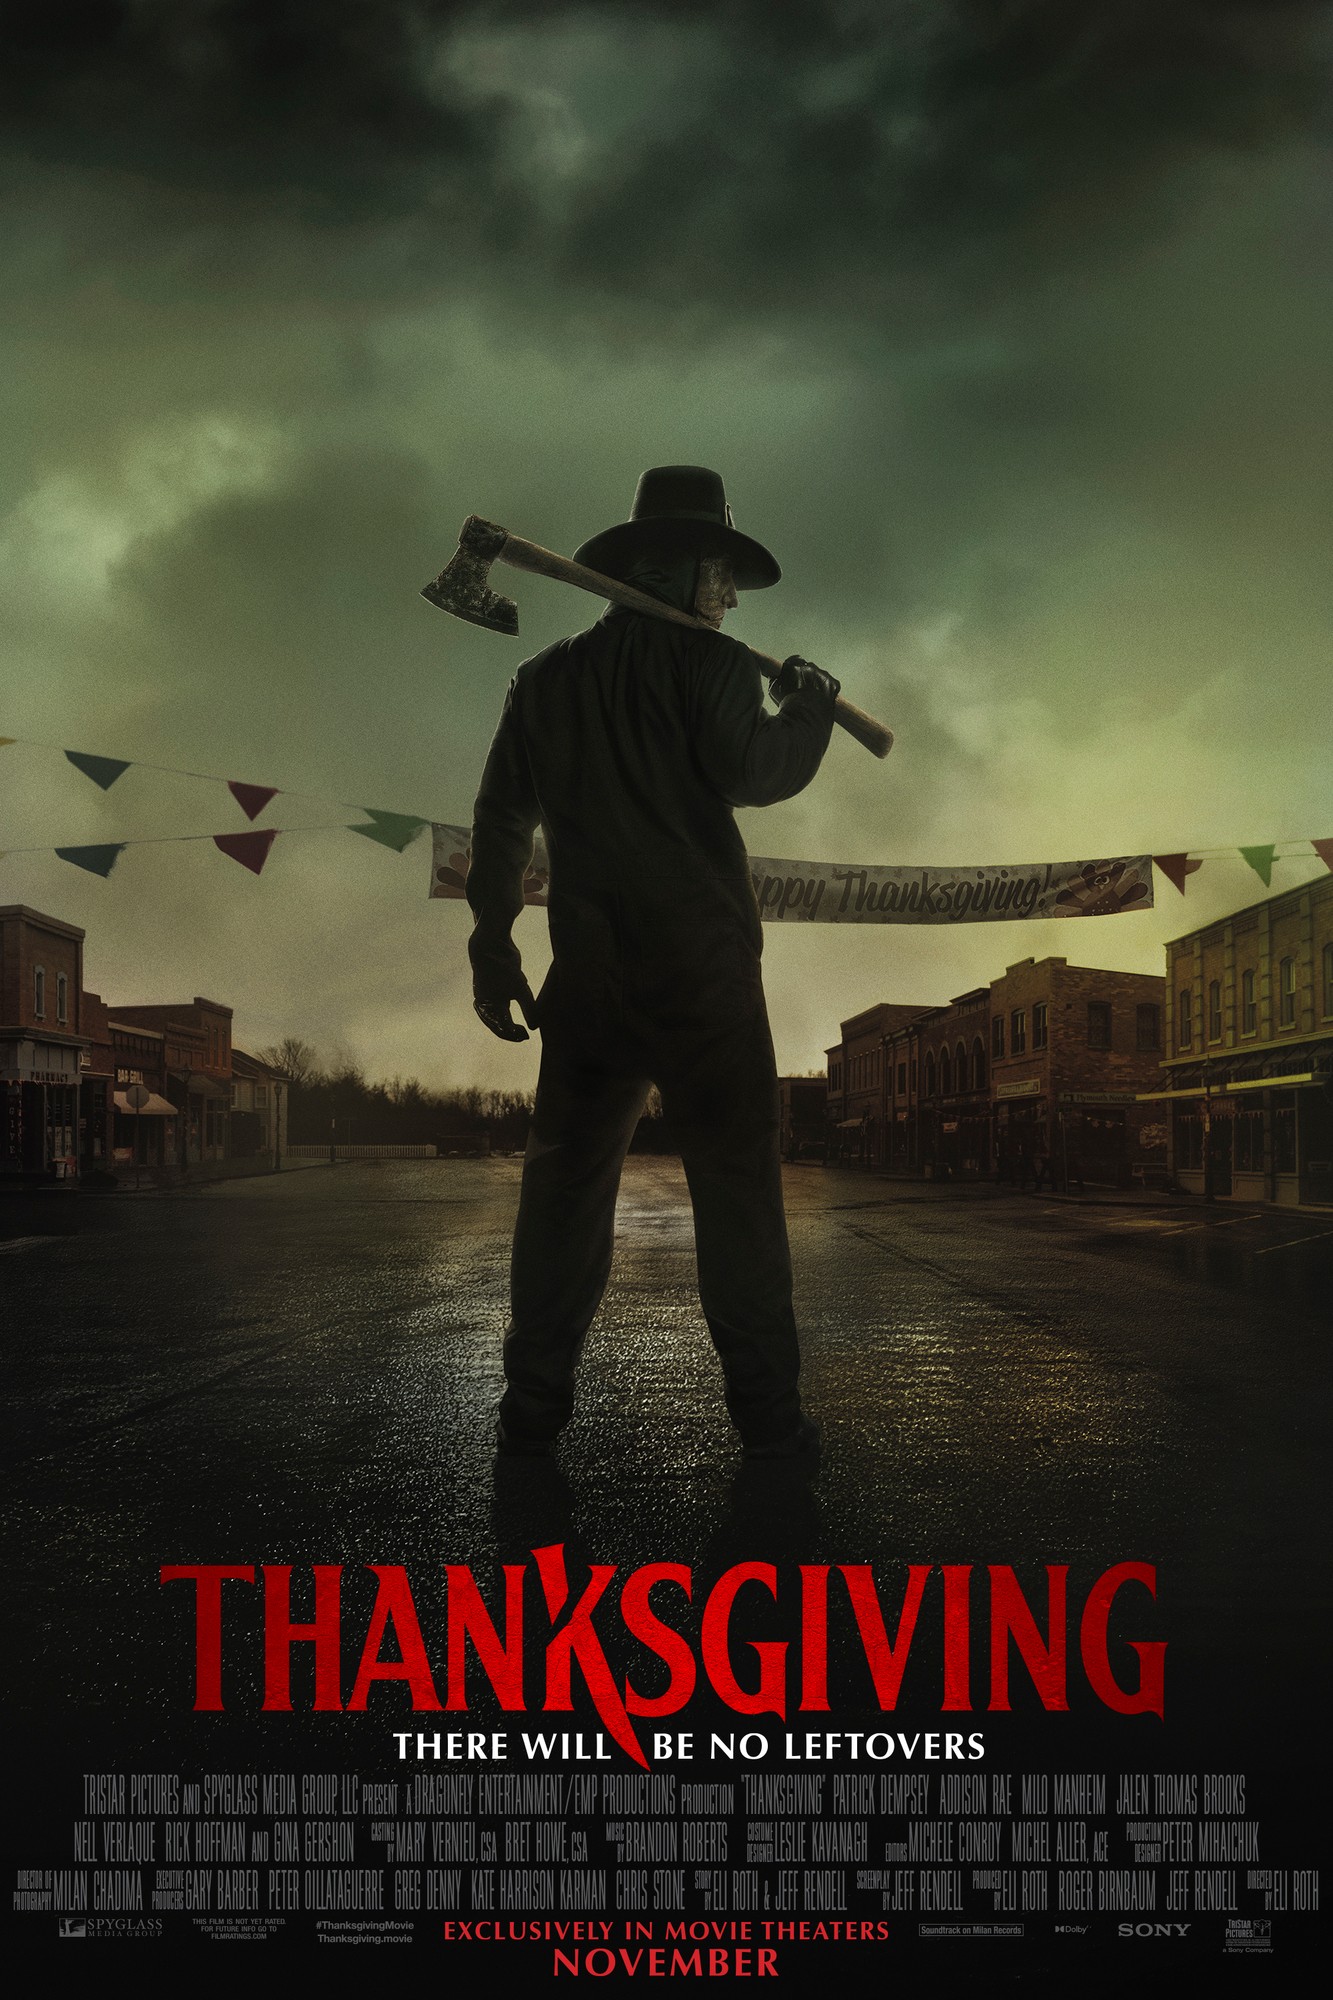 Arrow Video - #Thanksgiving may be over but take time out to catch